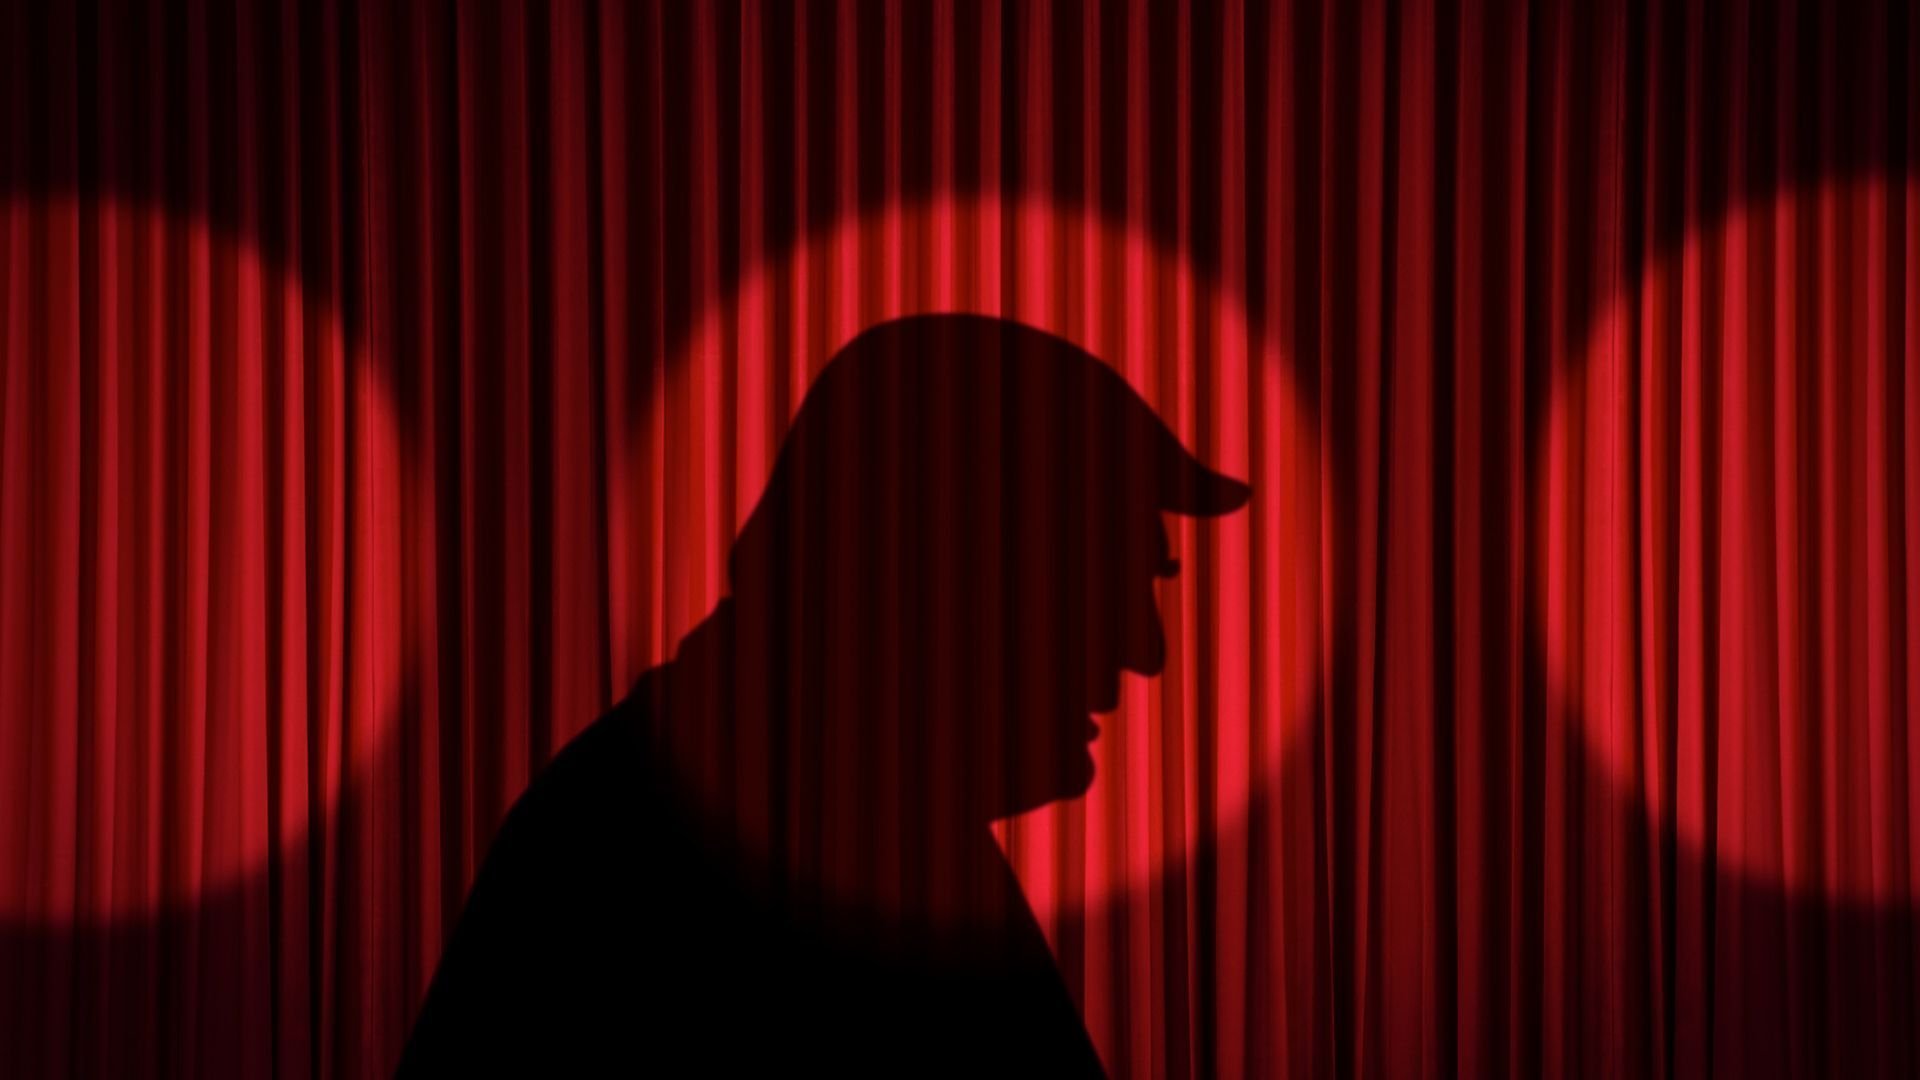 Behind the Curtain: Trump loyalty tests